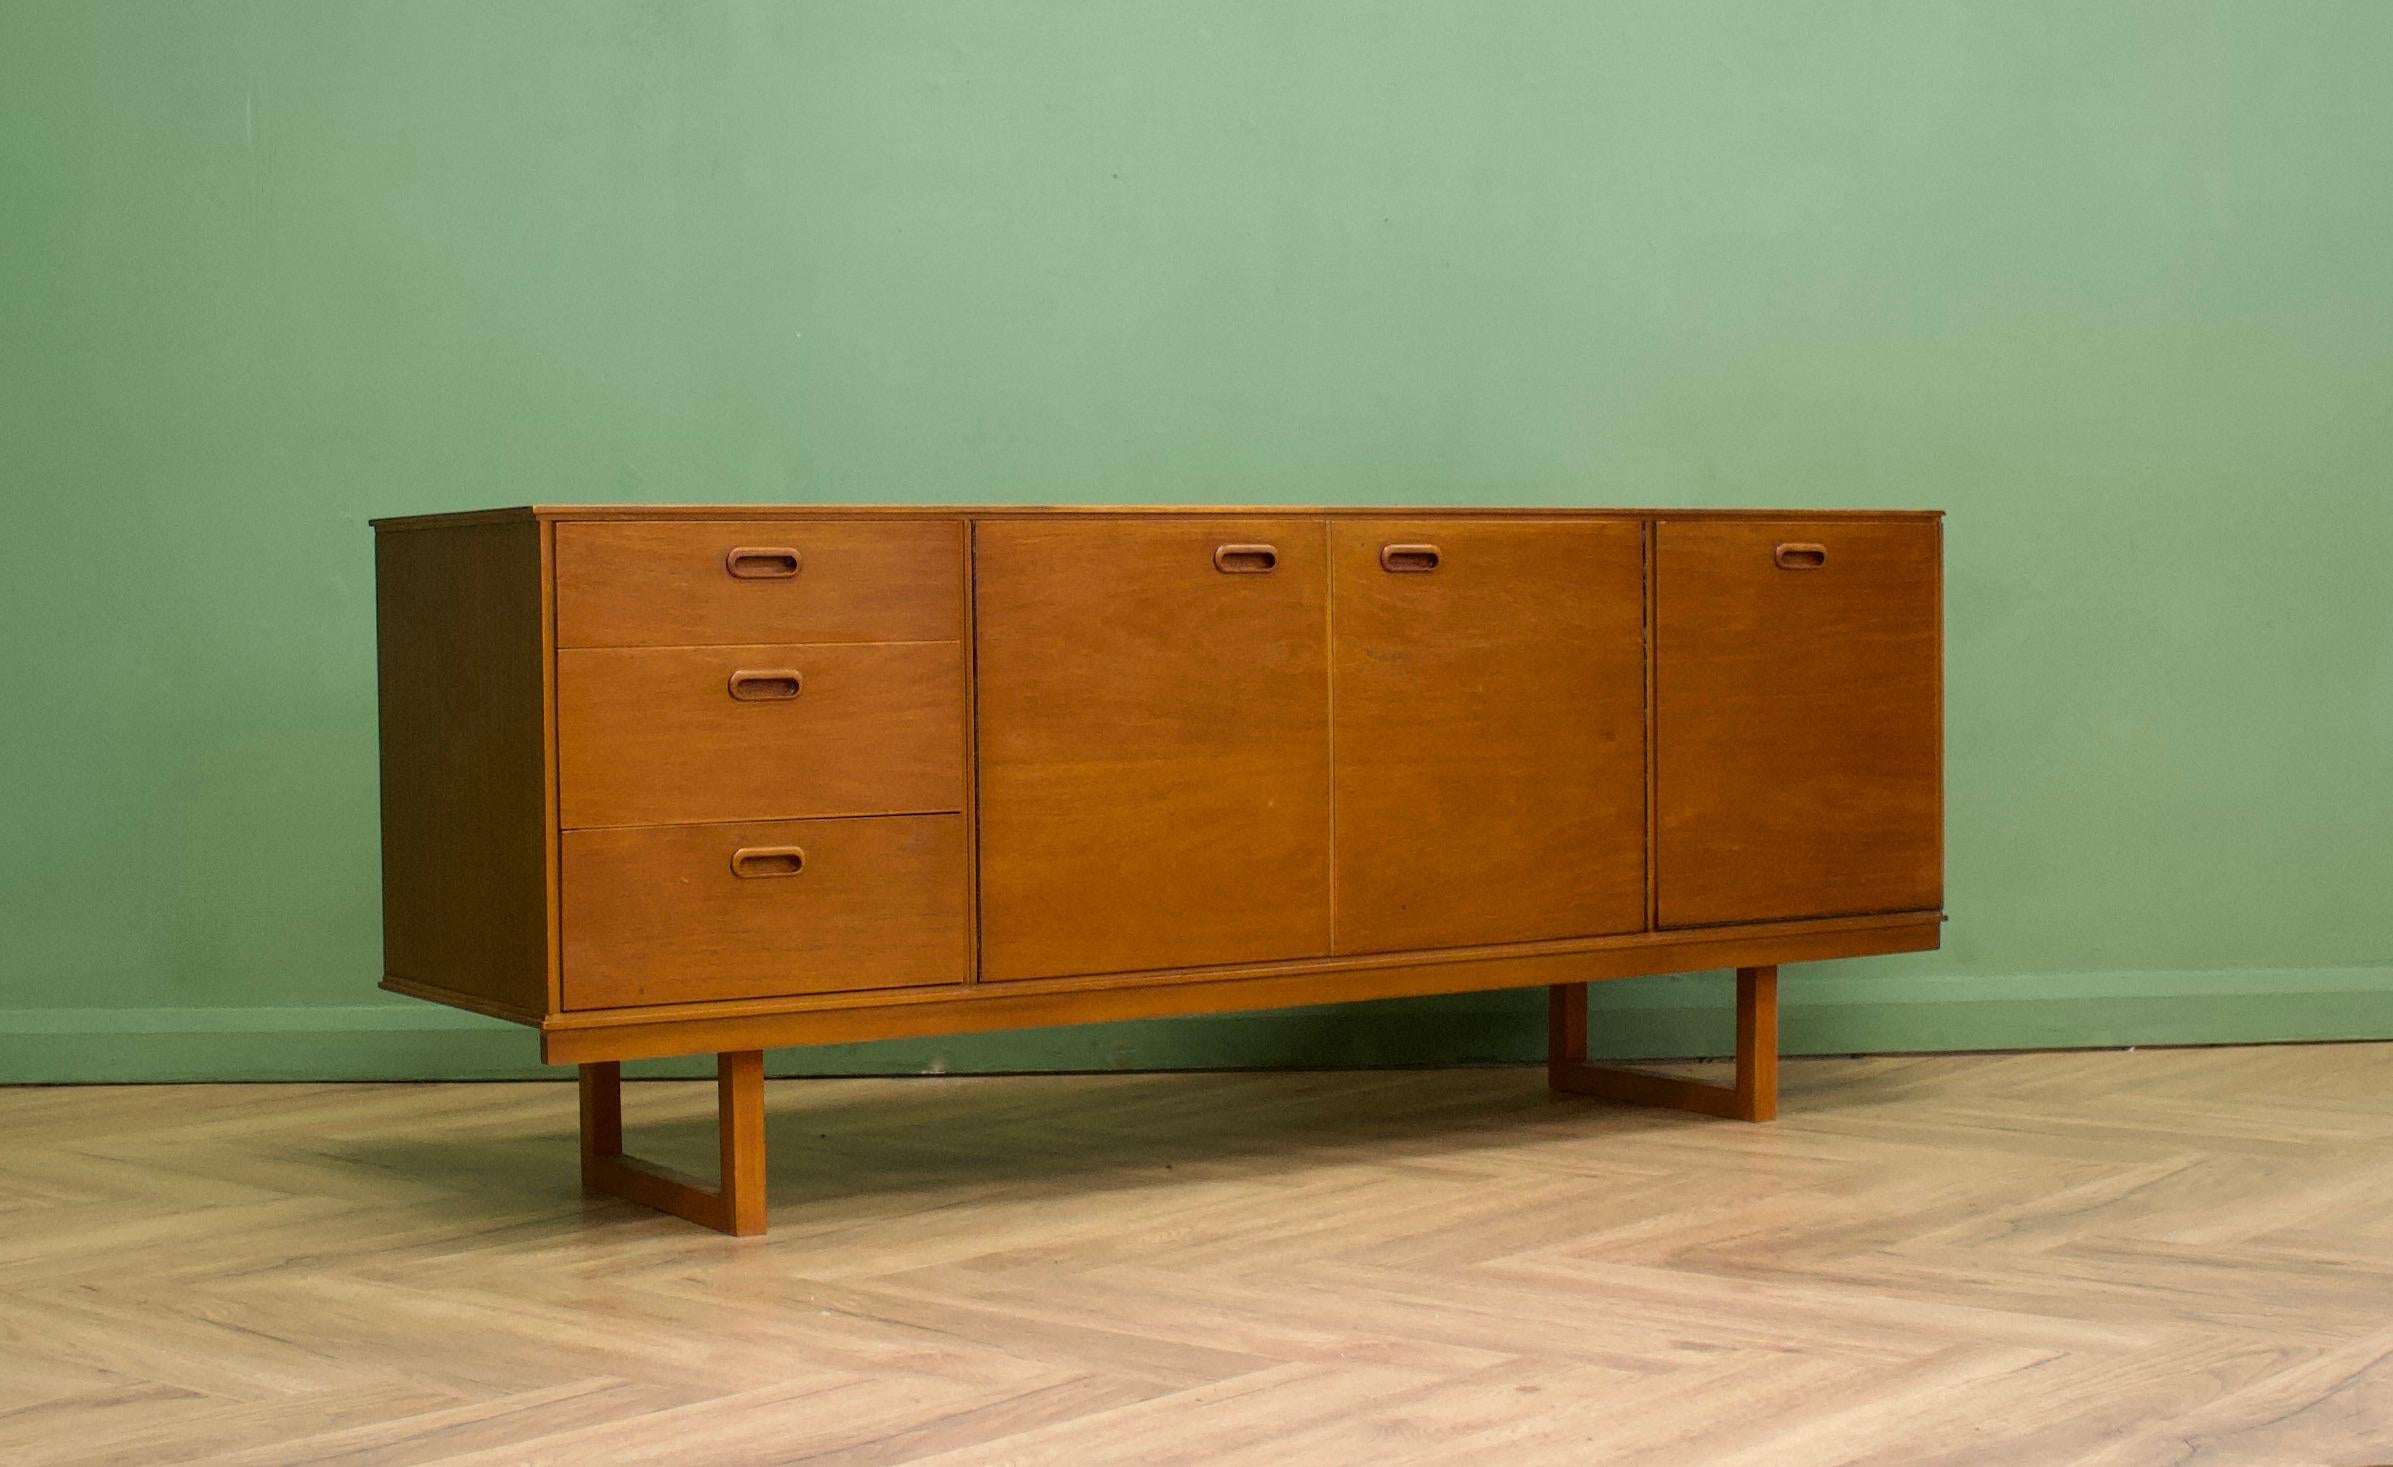 - Mid century modern sideboard
- Manufactured in the UK by Avalon
- Made of teak and teak veneer
- Featuring 3 drawers, 2 cupboards